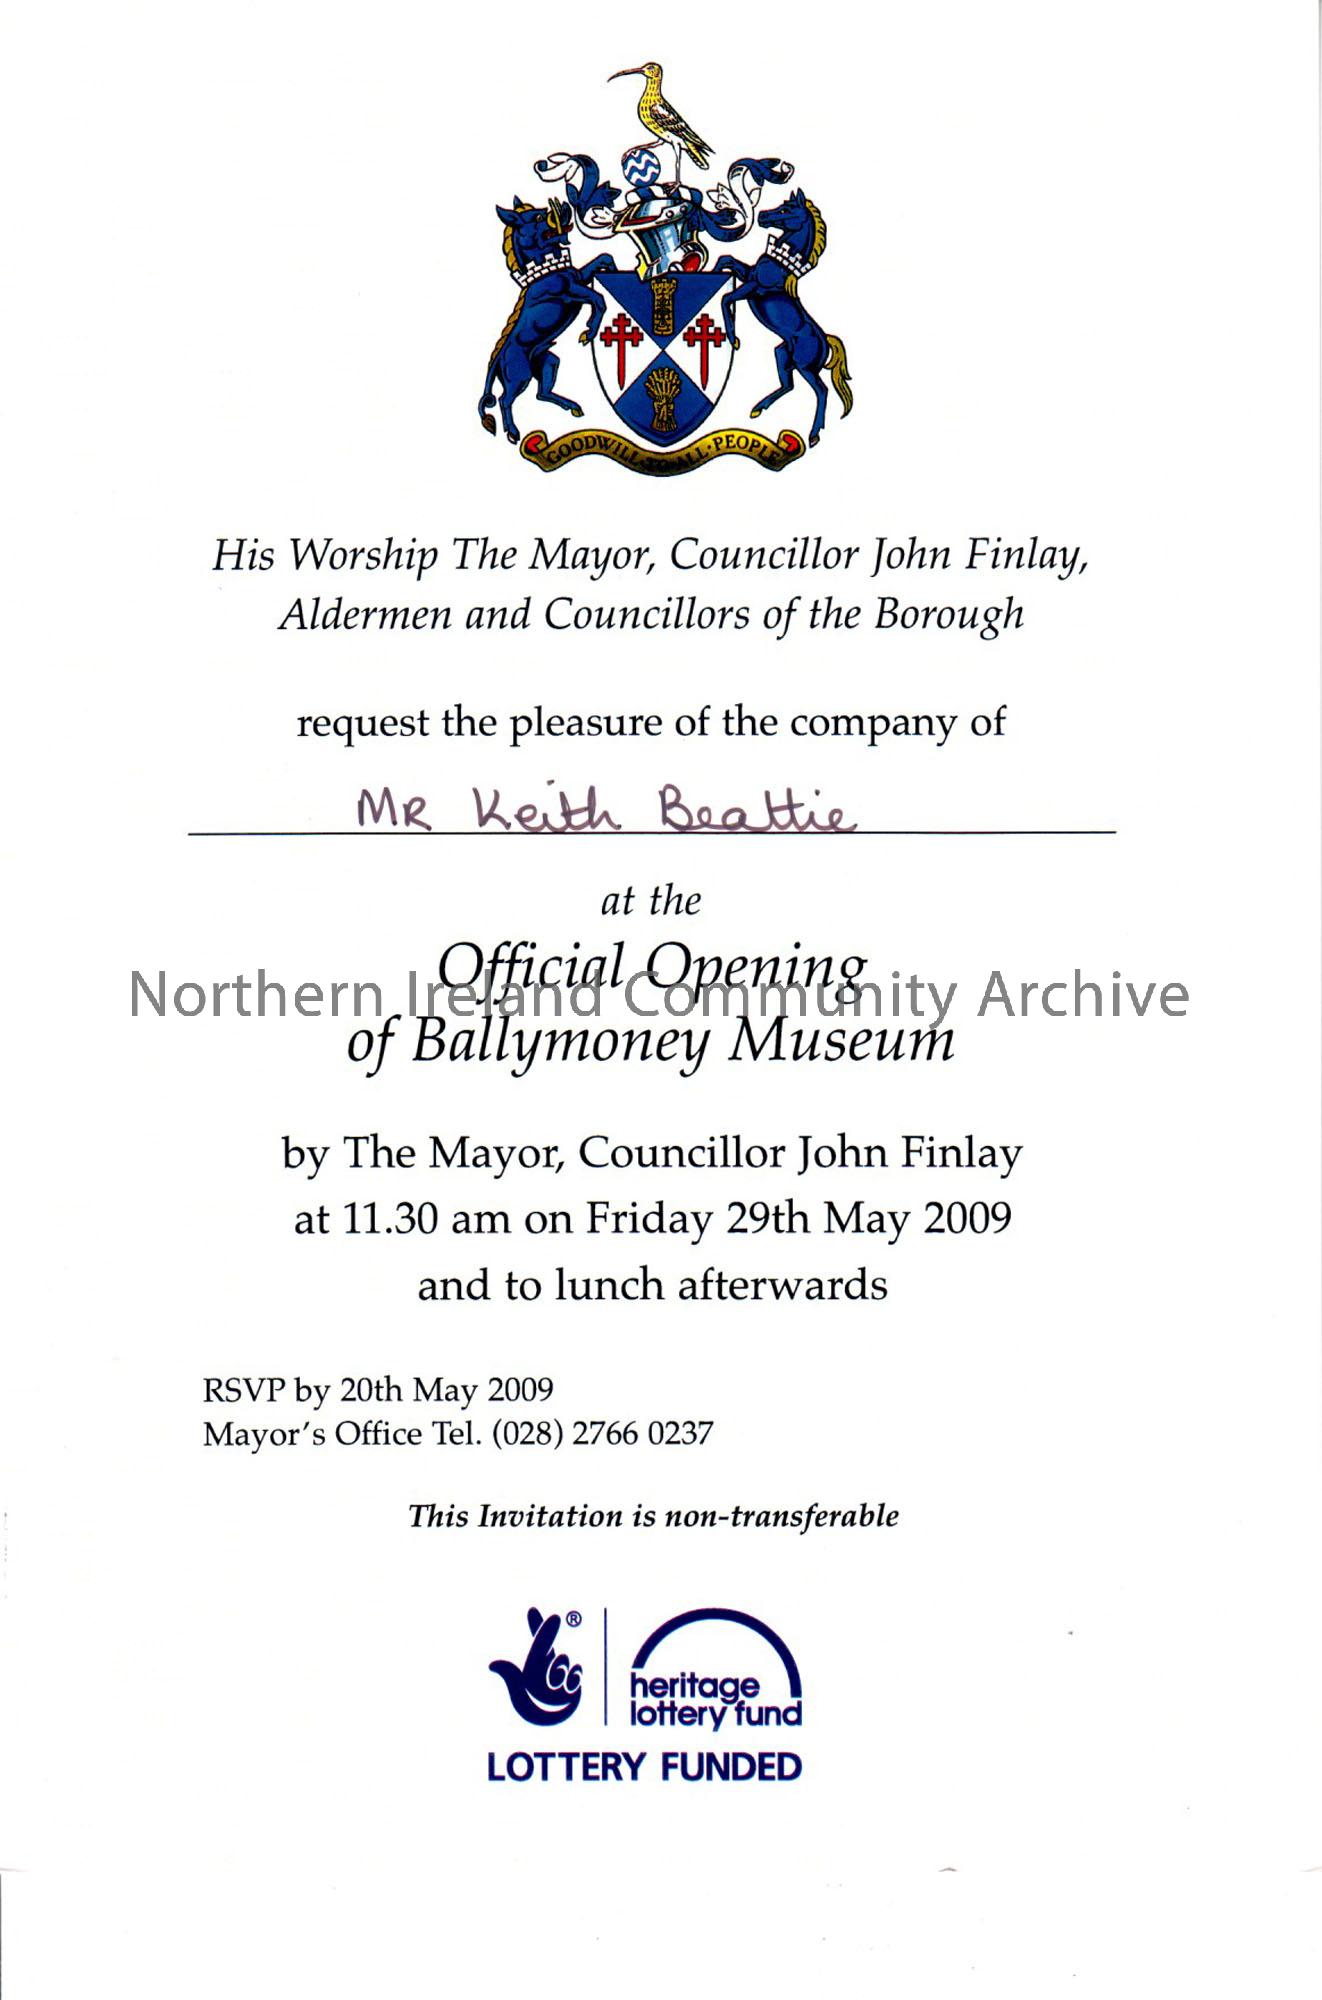 documents relating to the official opening of Ballymoney Museum by the Mayor, Councillor John Finlay on Friday 29th May 2009. Includes two invitations…